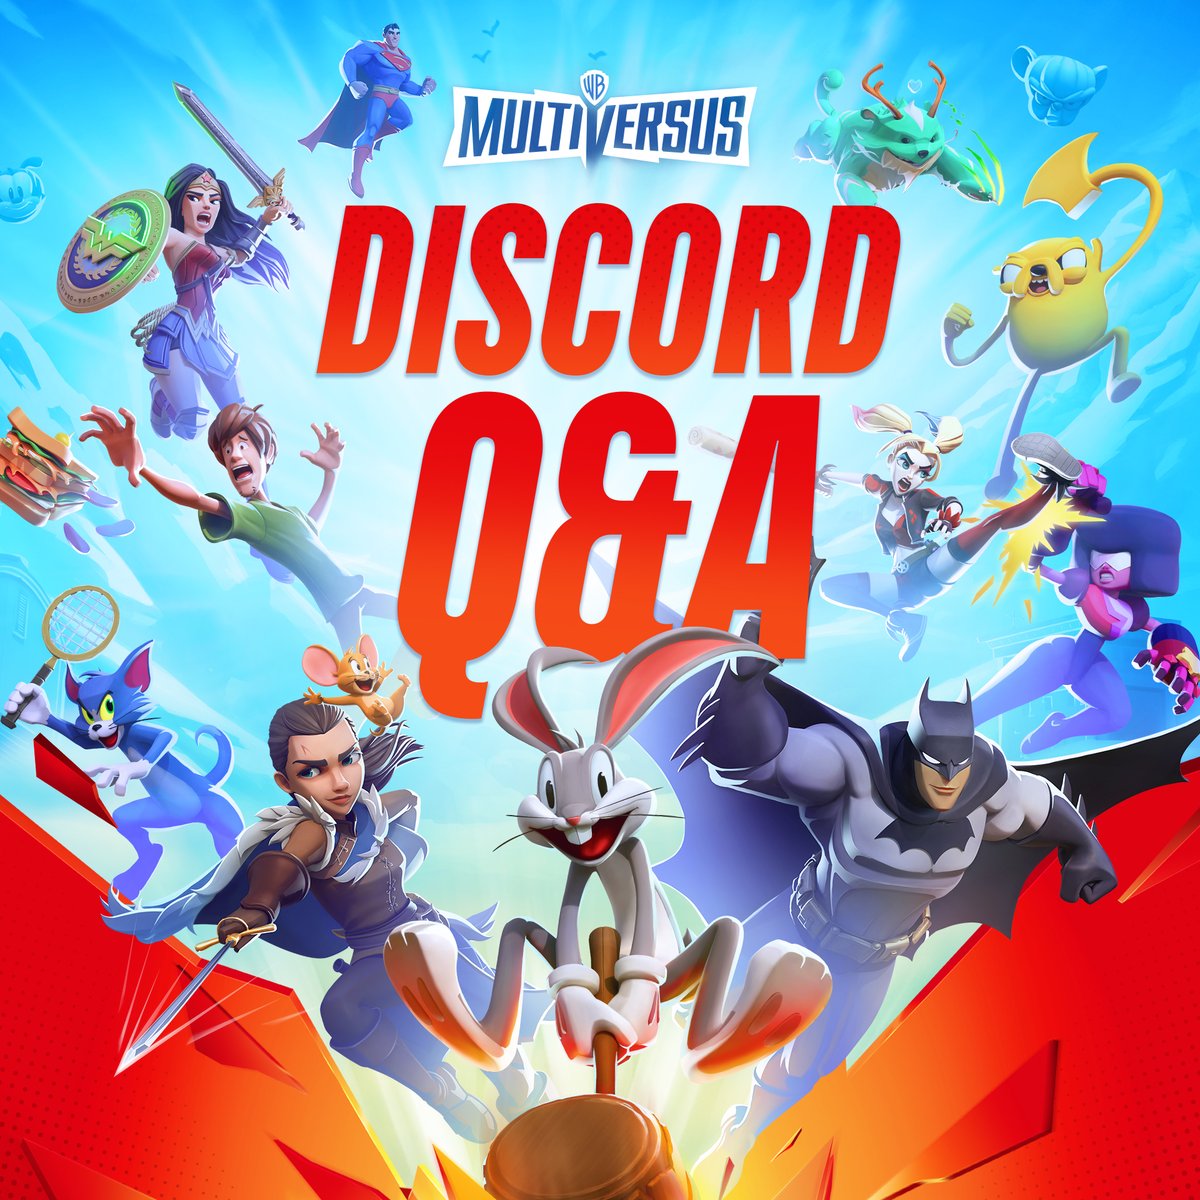 Have questions for the developers? Join us for a Q&A on Discord this Wednesday, May 1 @ 11 AM PT, where @AJAX_HQ & @darknakat will be joined by @Player1stGames Developers Devin Gajewski, Grant Ervin, and Colby Yeates! Reply with your questions here or post them in the official